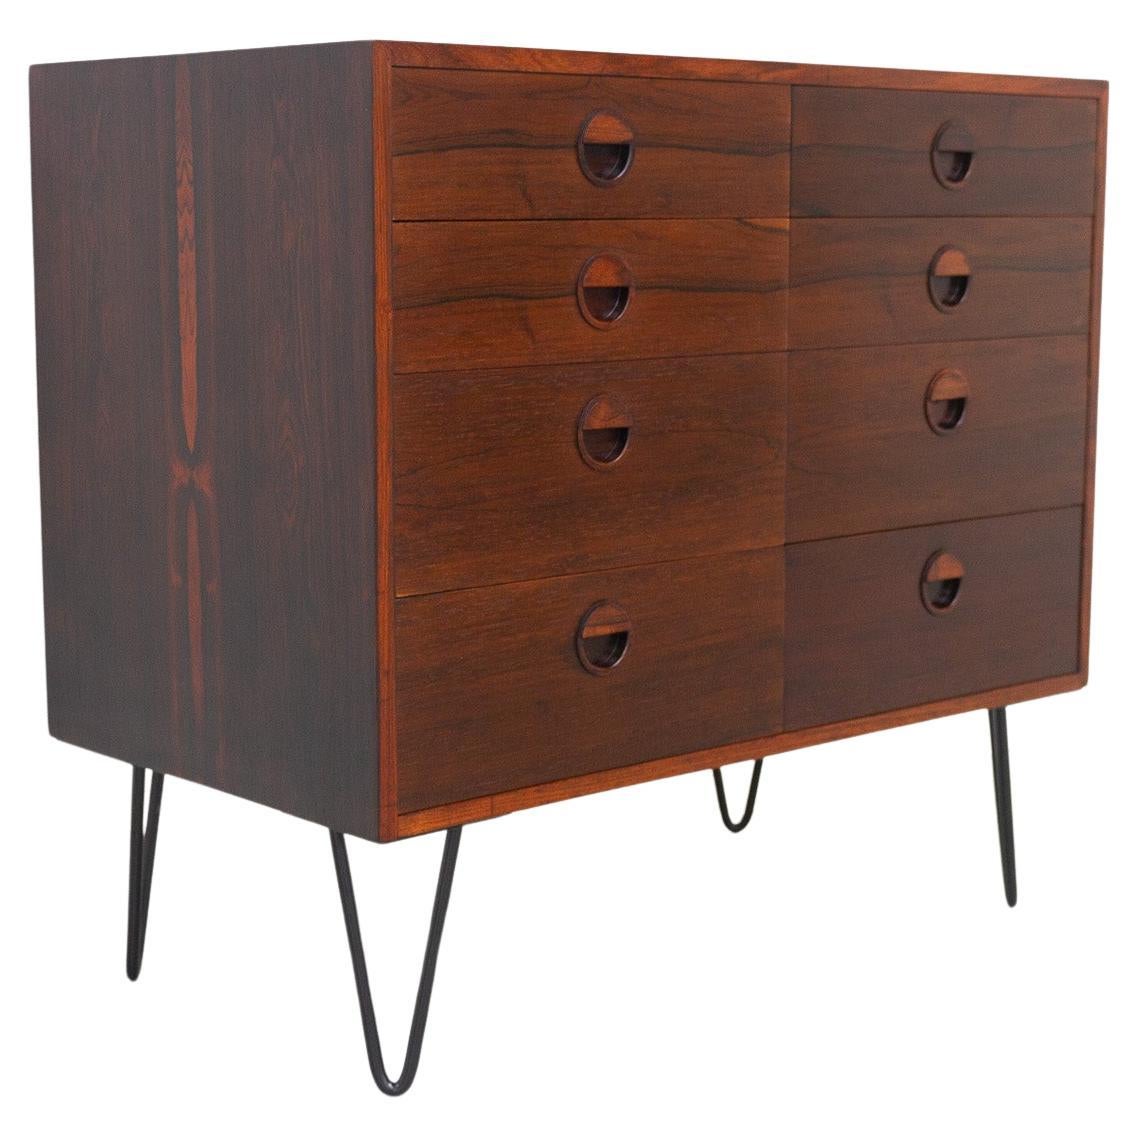 Vintage Danish Rosewood Chest of Drawers by Hg Furniture, 1960s For Sale